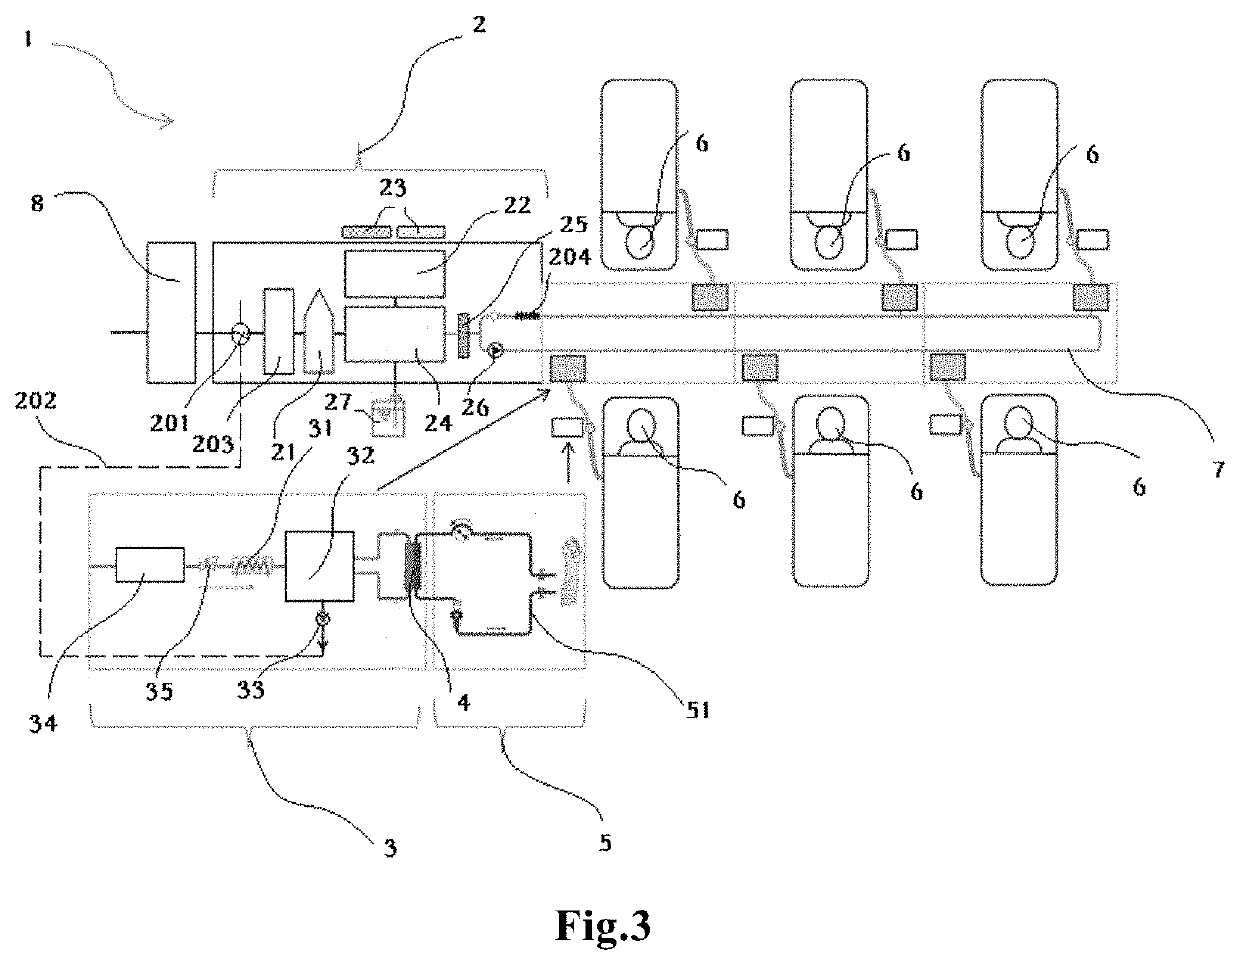 Centrally Controlled Multi-patient Dialysis Treatment System and its Use